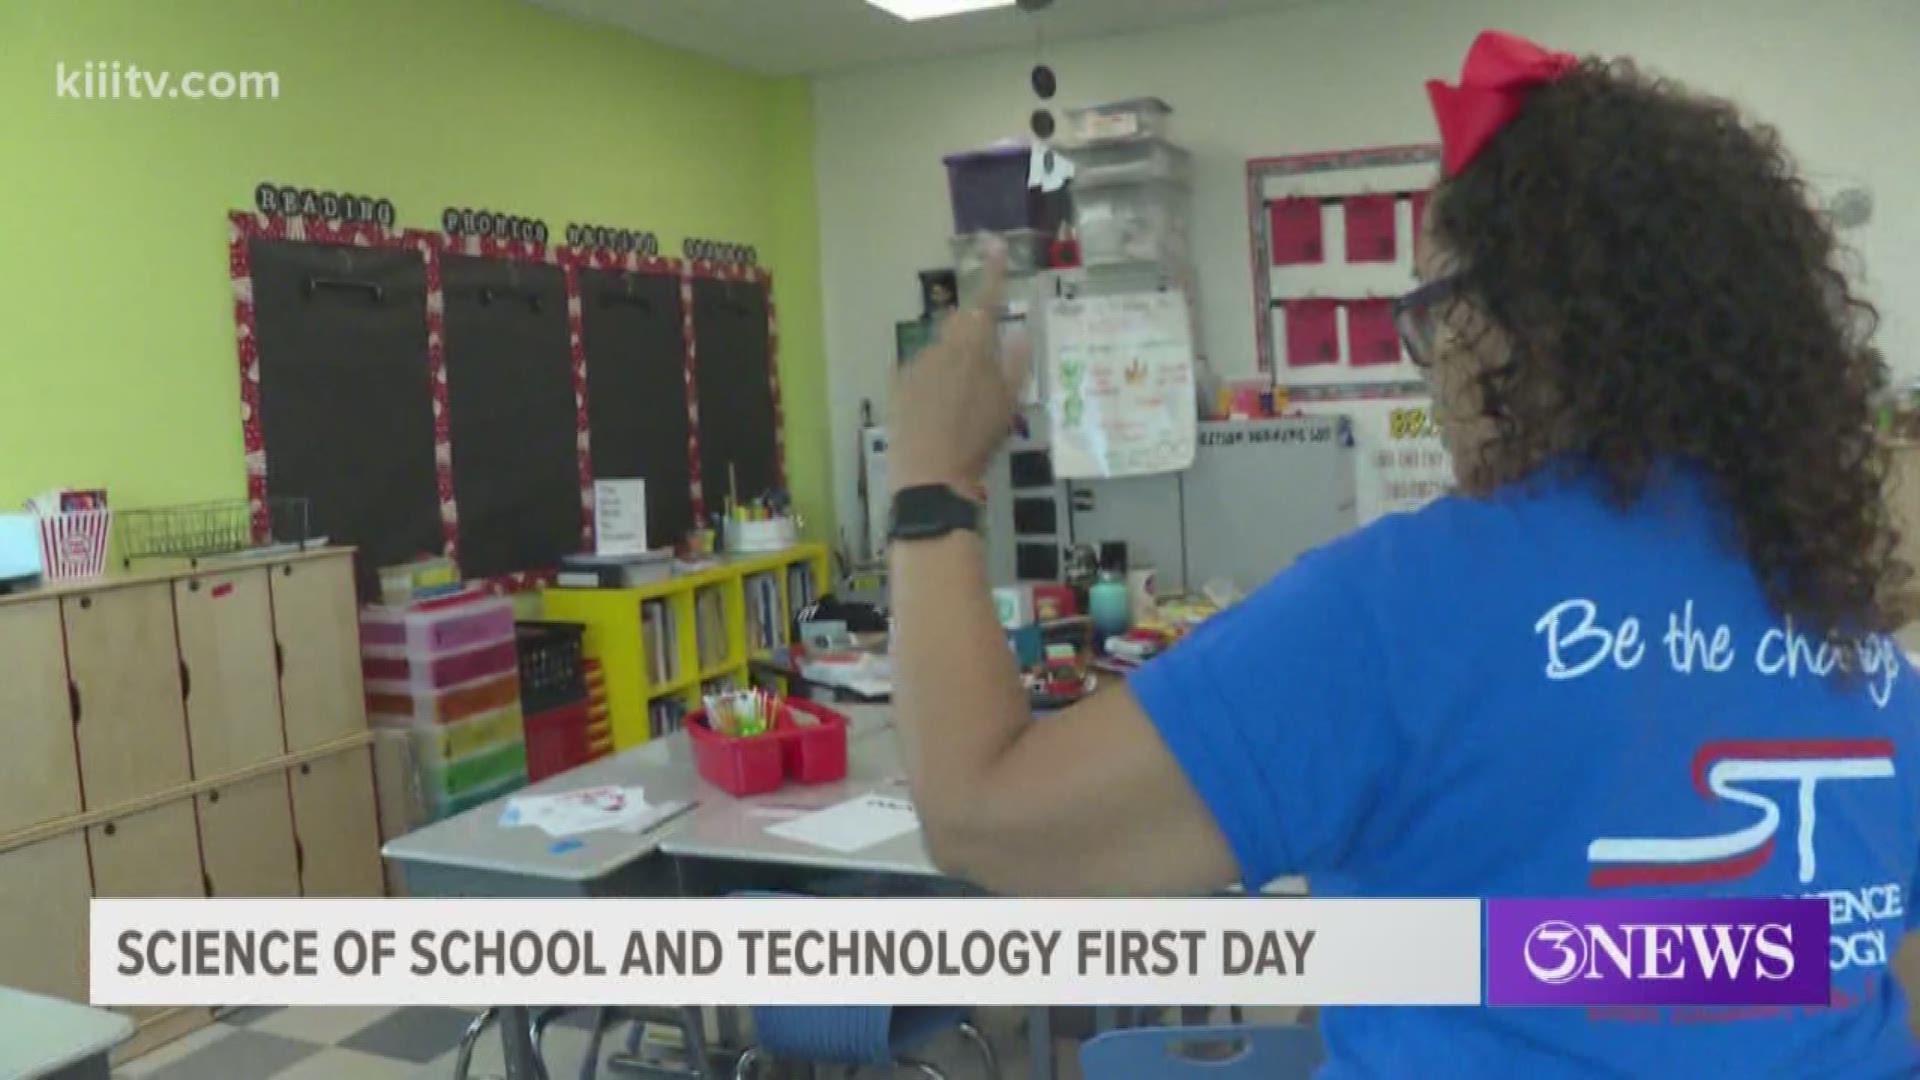 The School of Science and Technology in Corpus Christi opened the doors to its new campus for the first day of classes Monday, and they were kind enough to give 3News a tour!